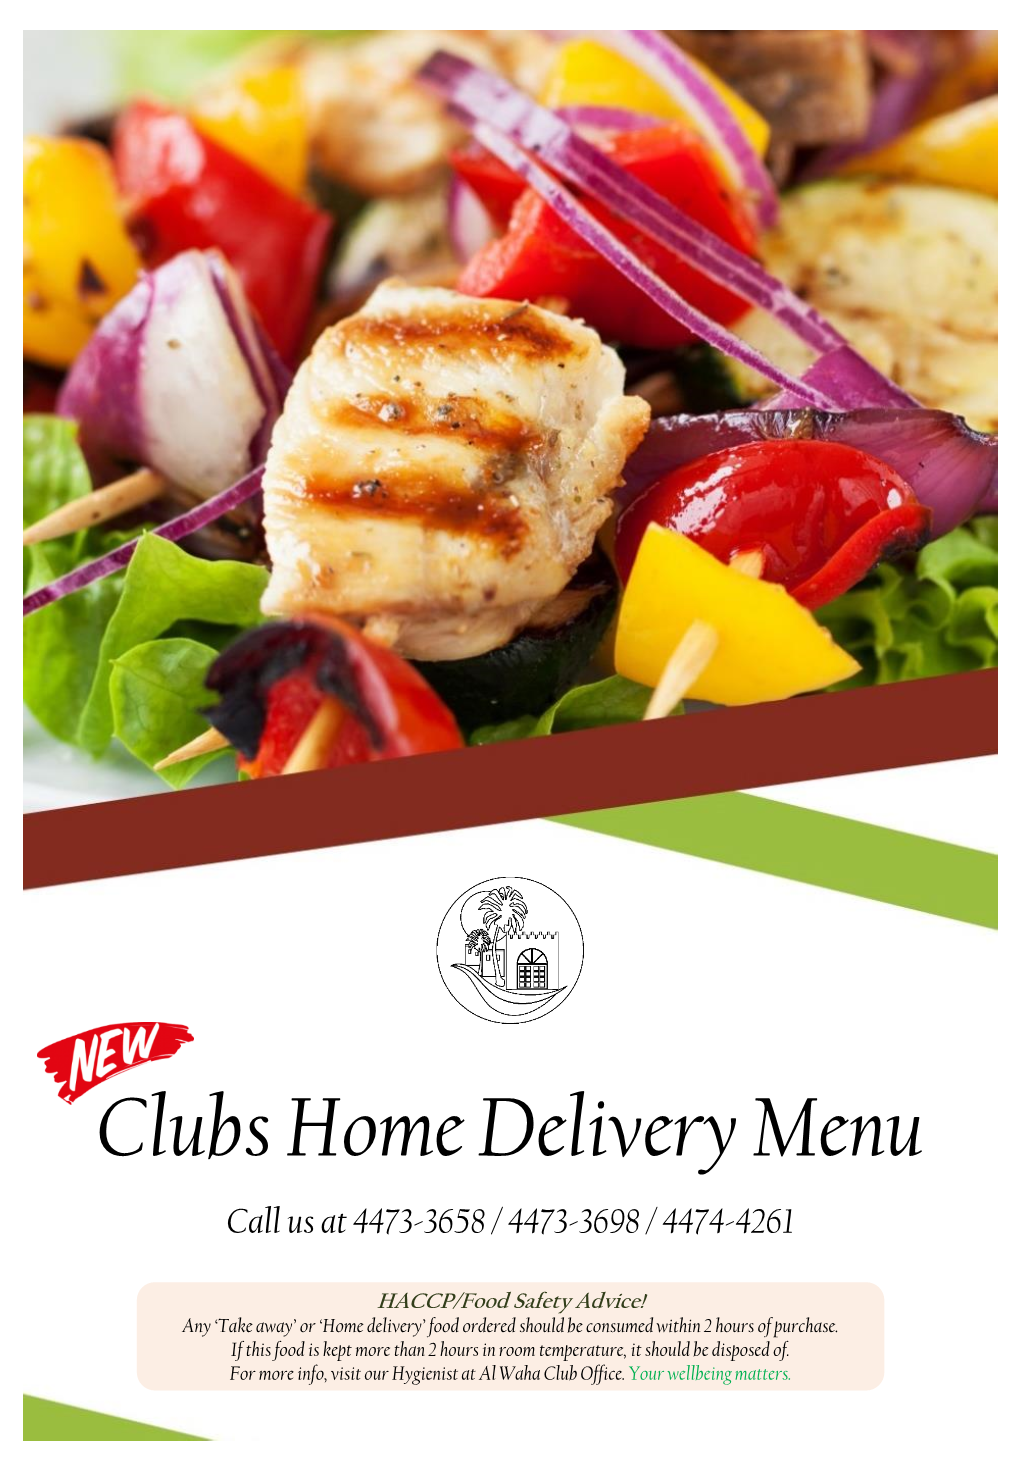 Clubs Home Delivery Menu Call Us at 4473-3658 / 4473-3698 / 4474-4261